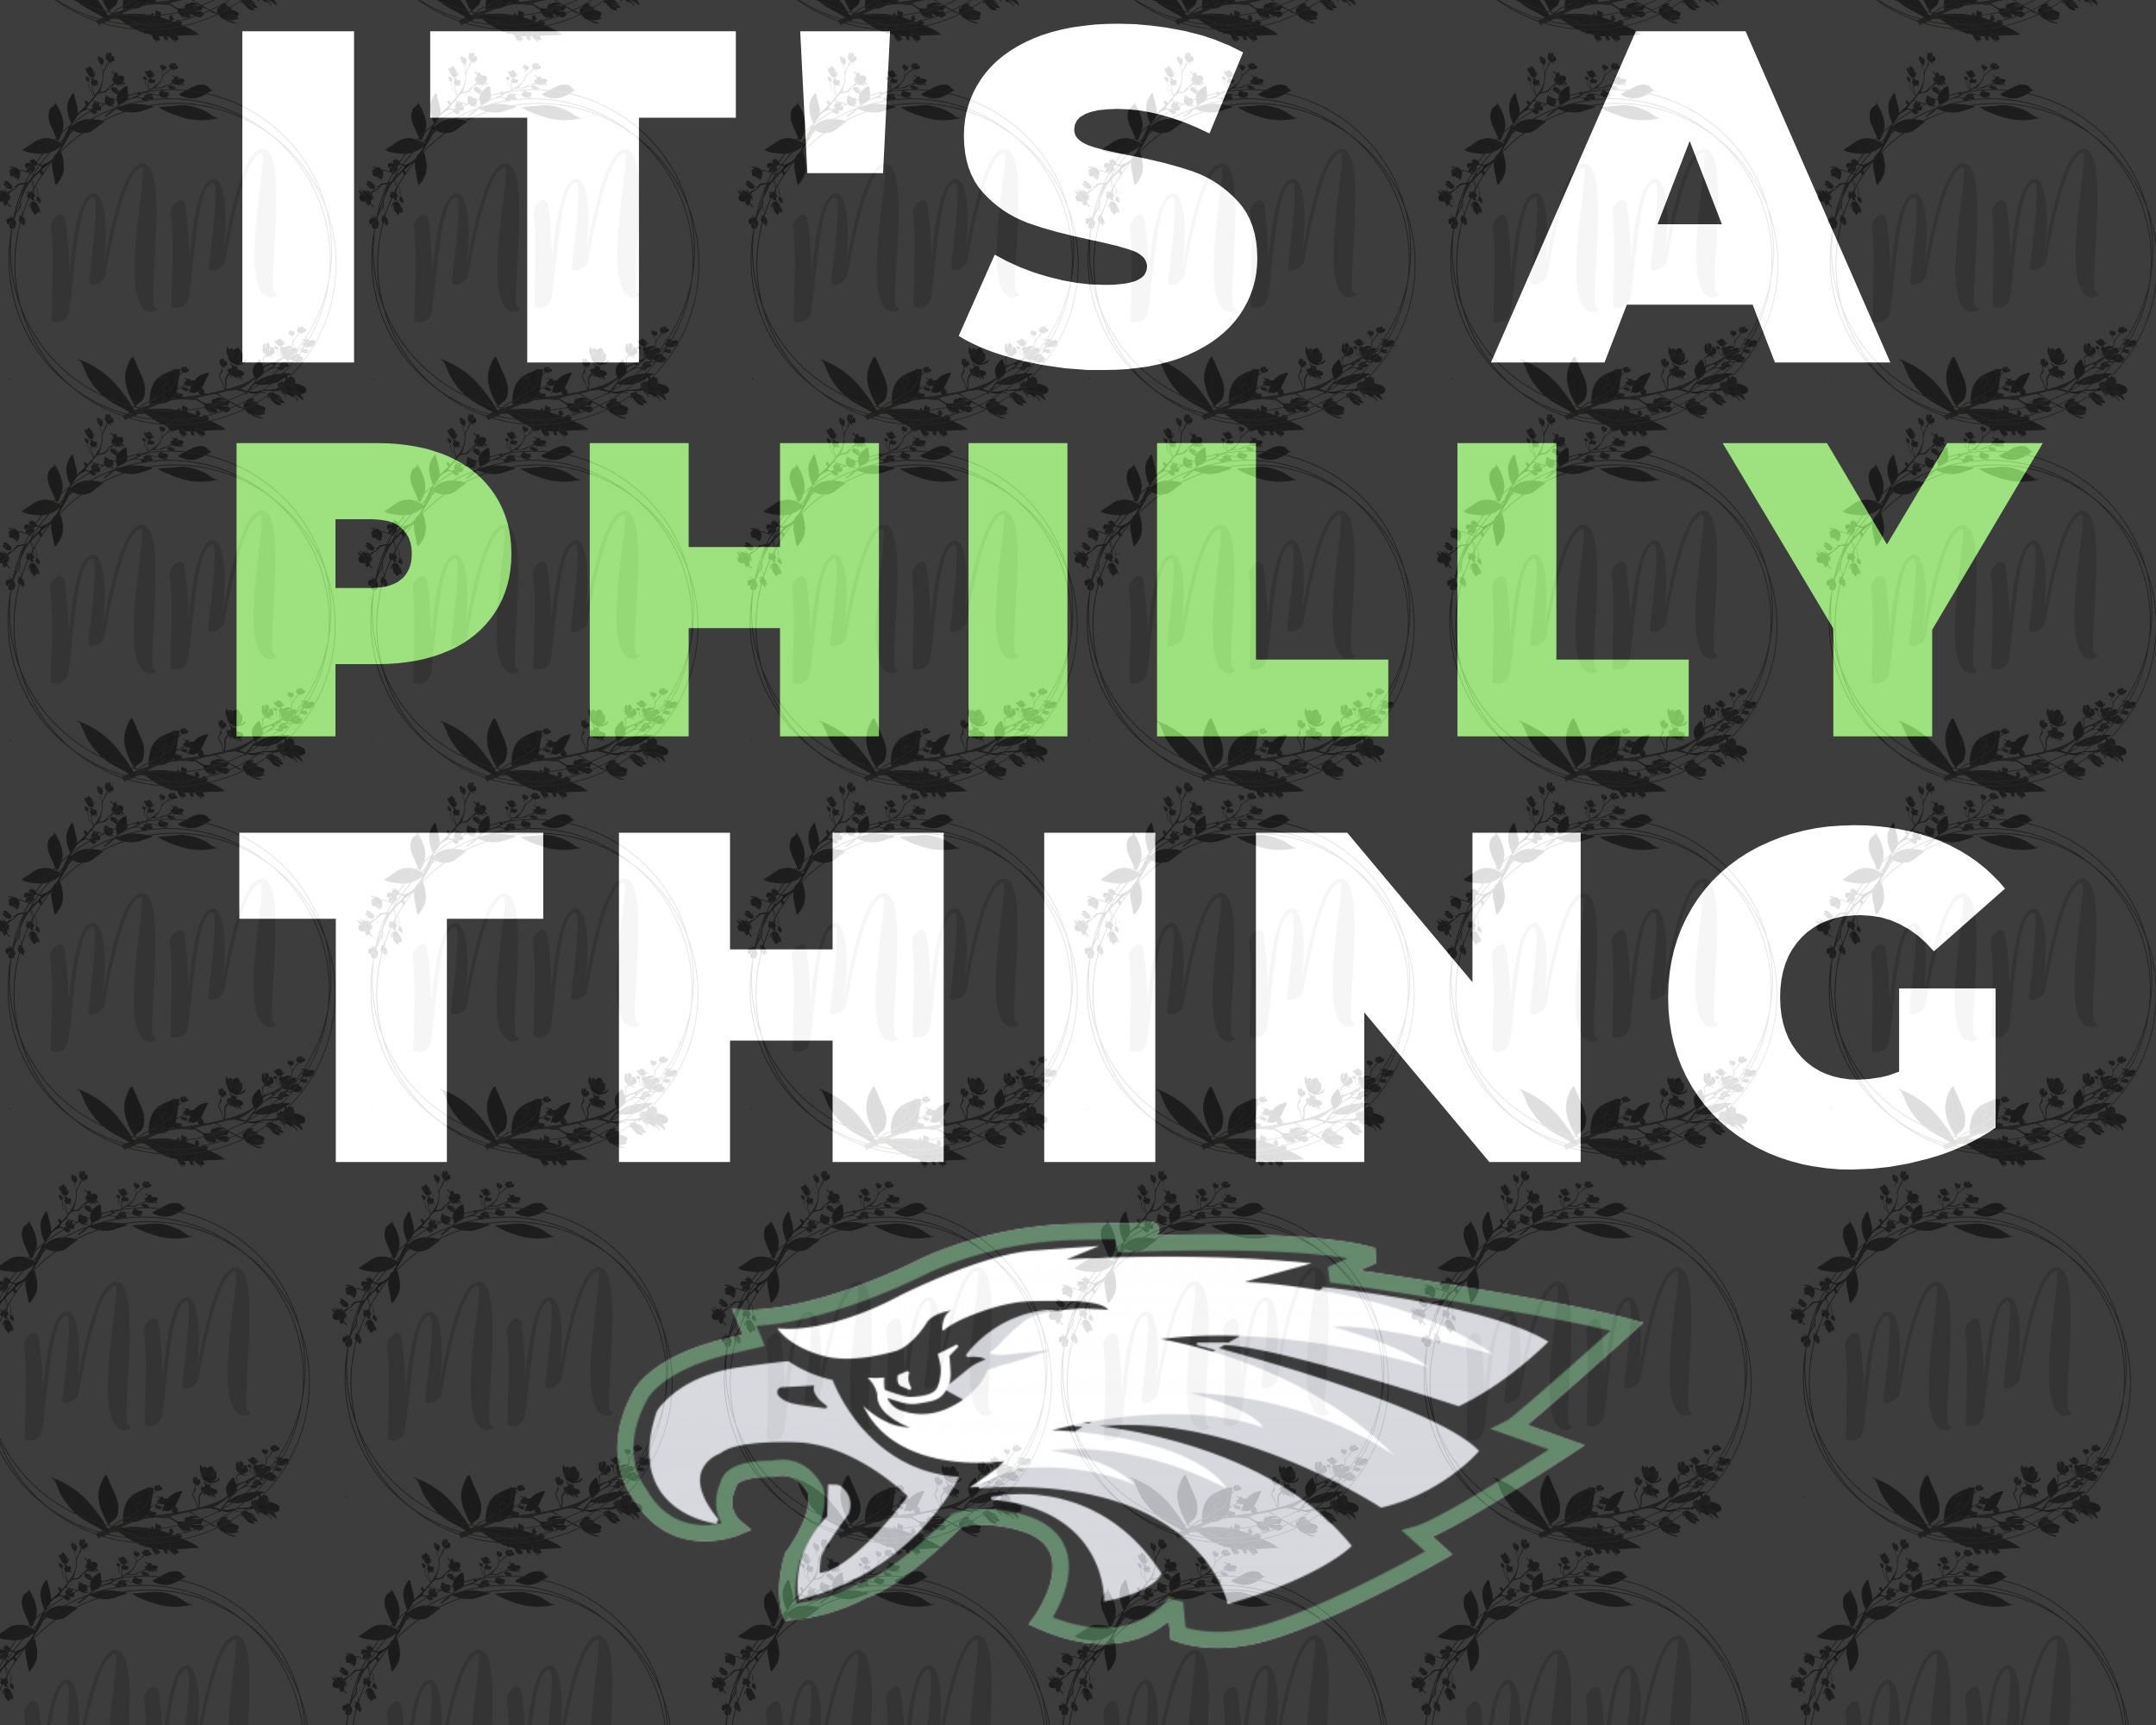 It's A Philly Thing Pngtrending Shirt Its A Philadelphia - Bluecat